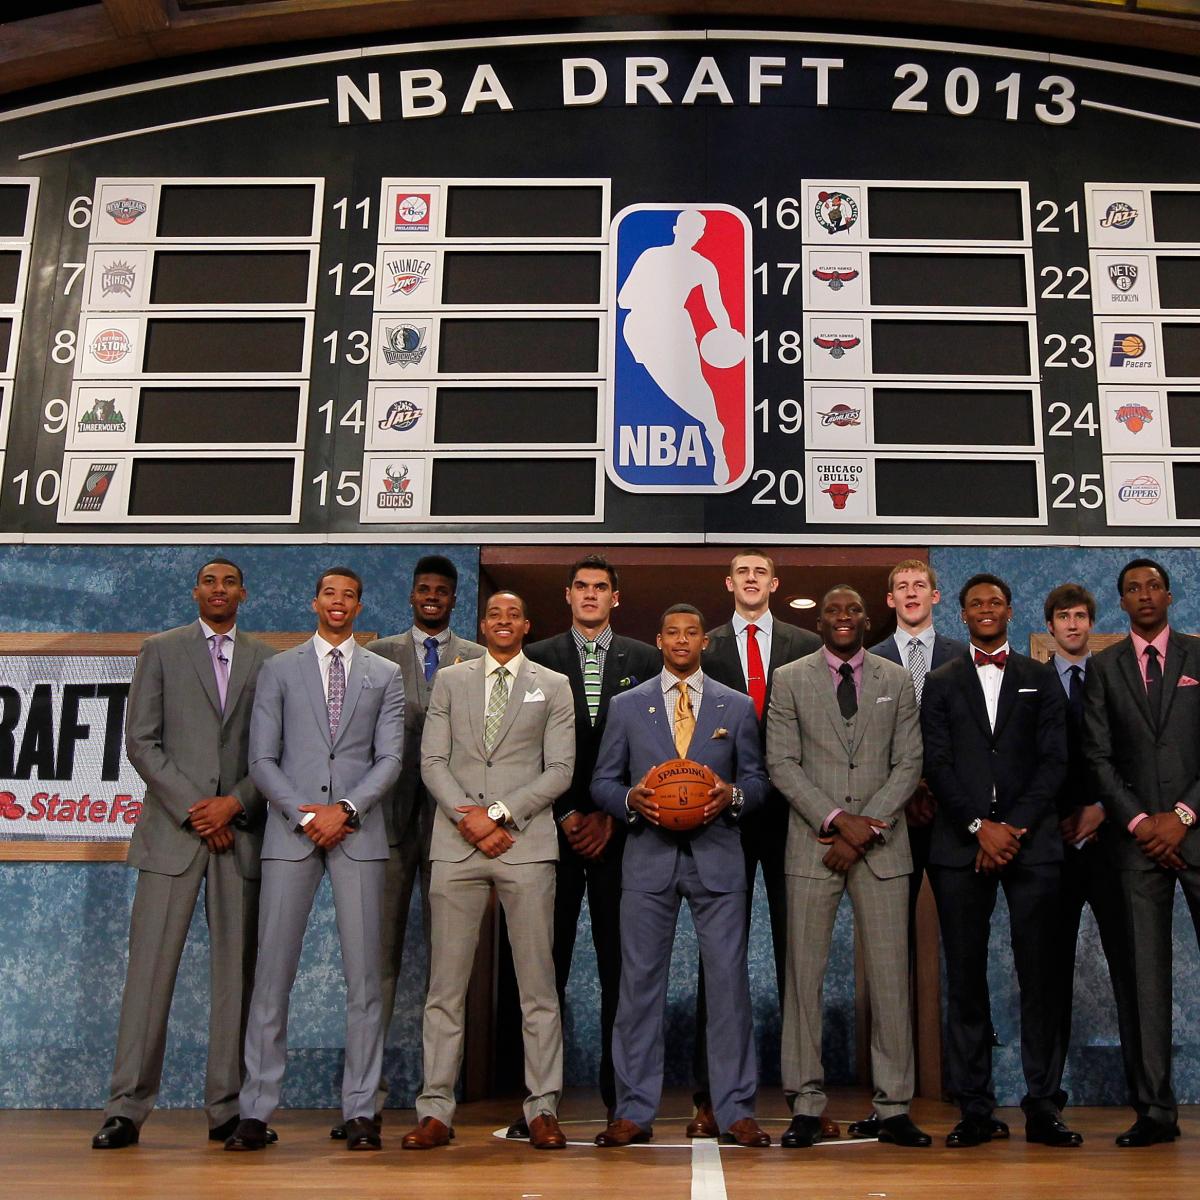 50 Amazing Pictures of NBA Superstars on Draft Day News, Scores